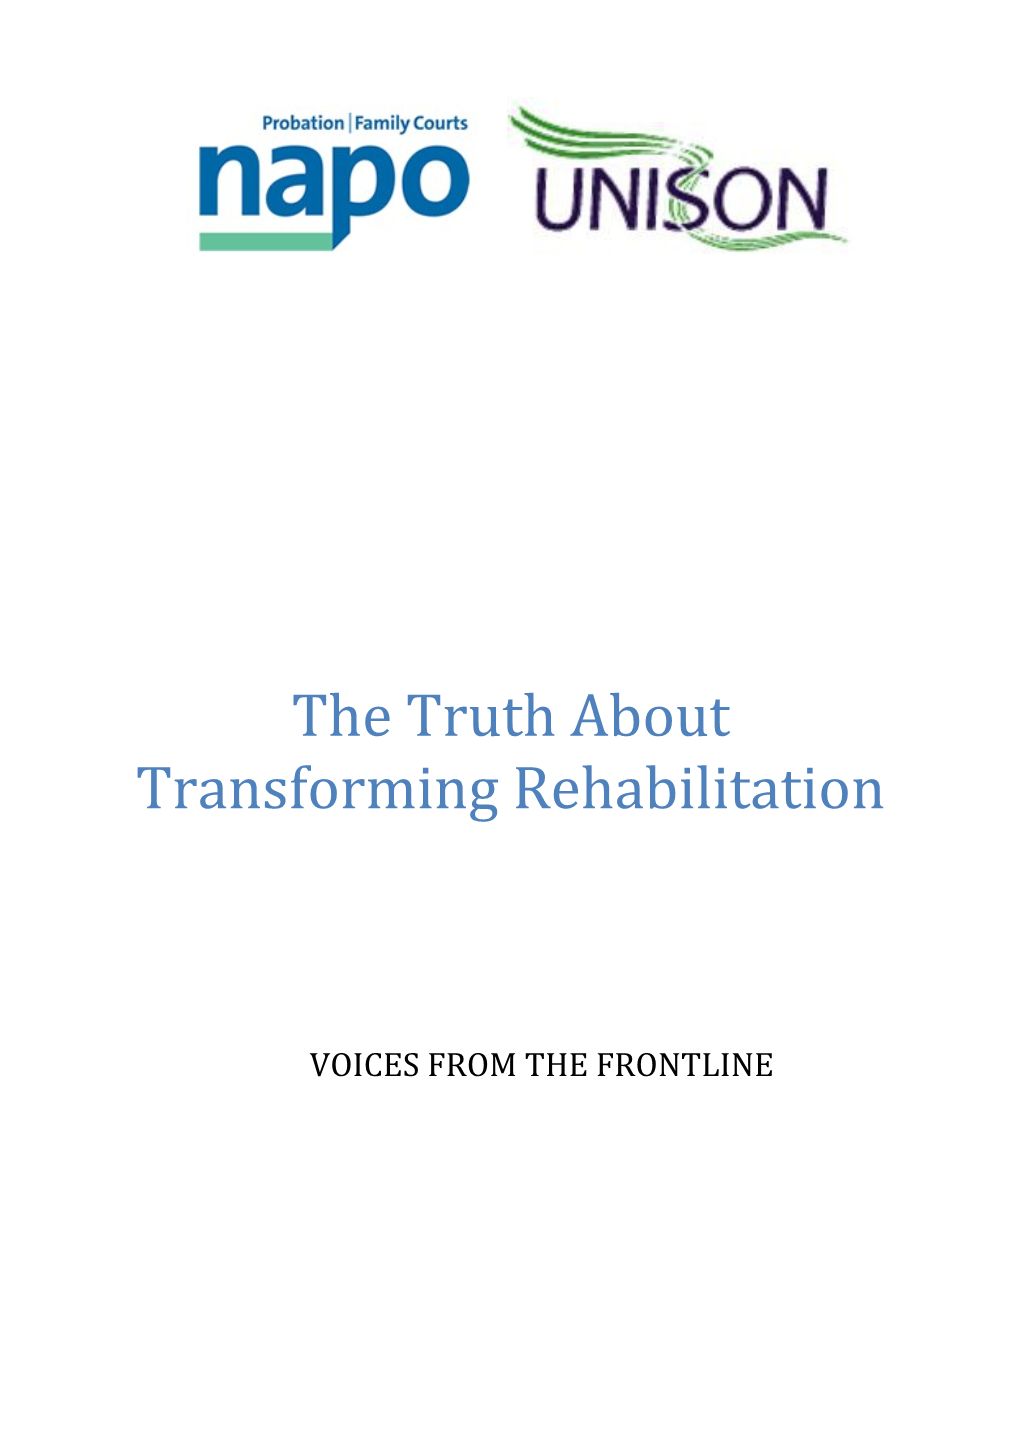 The Truth About Transforming Rehabilitation